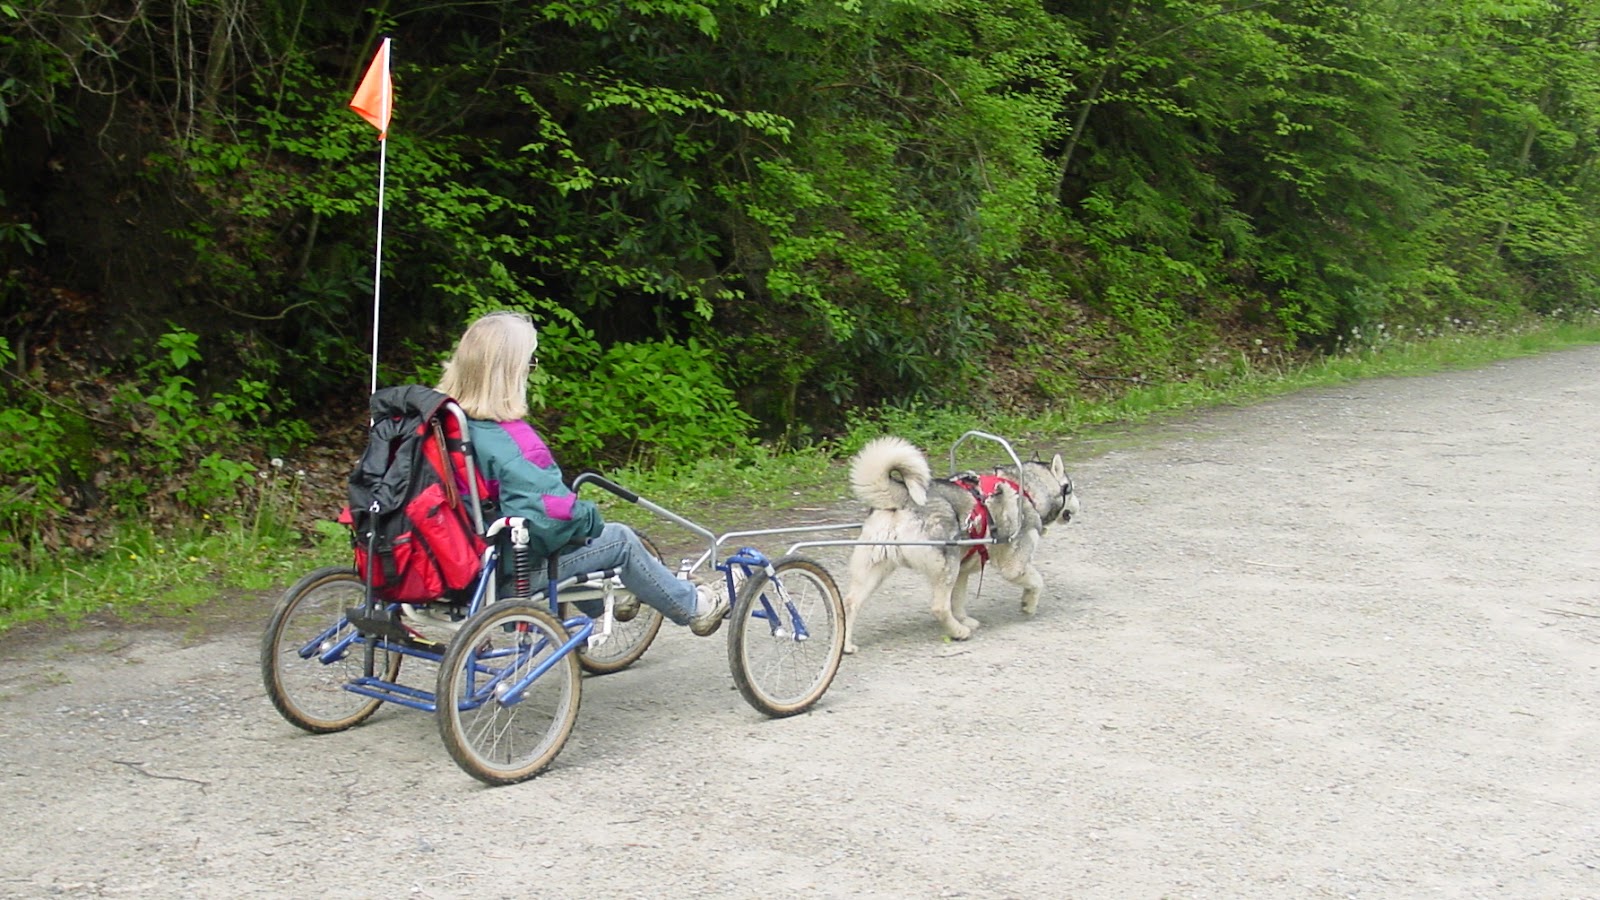 A woman in a four-wheeled vehicle pulled by a single dog. 